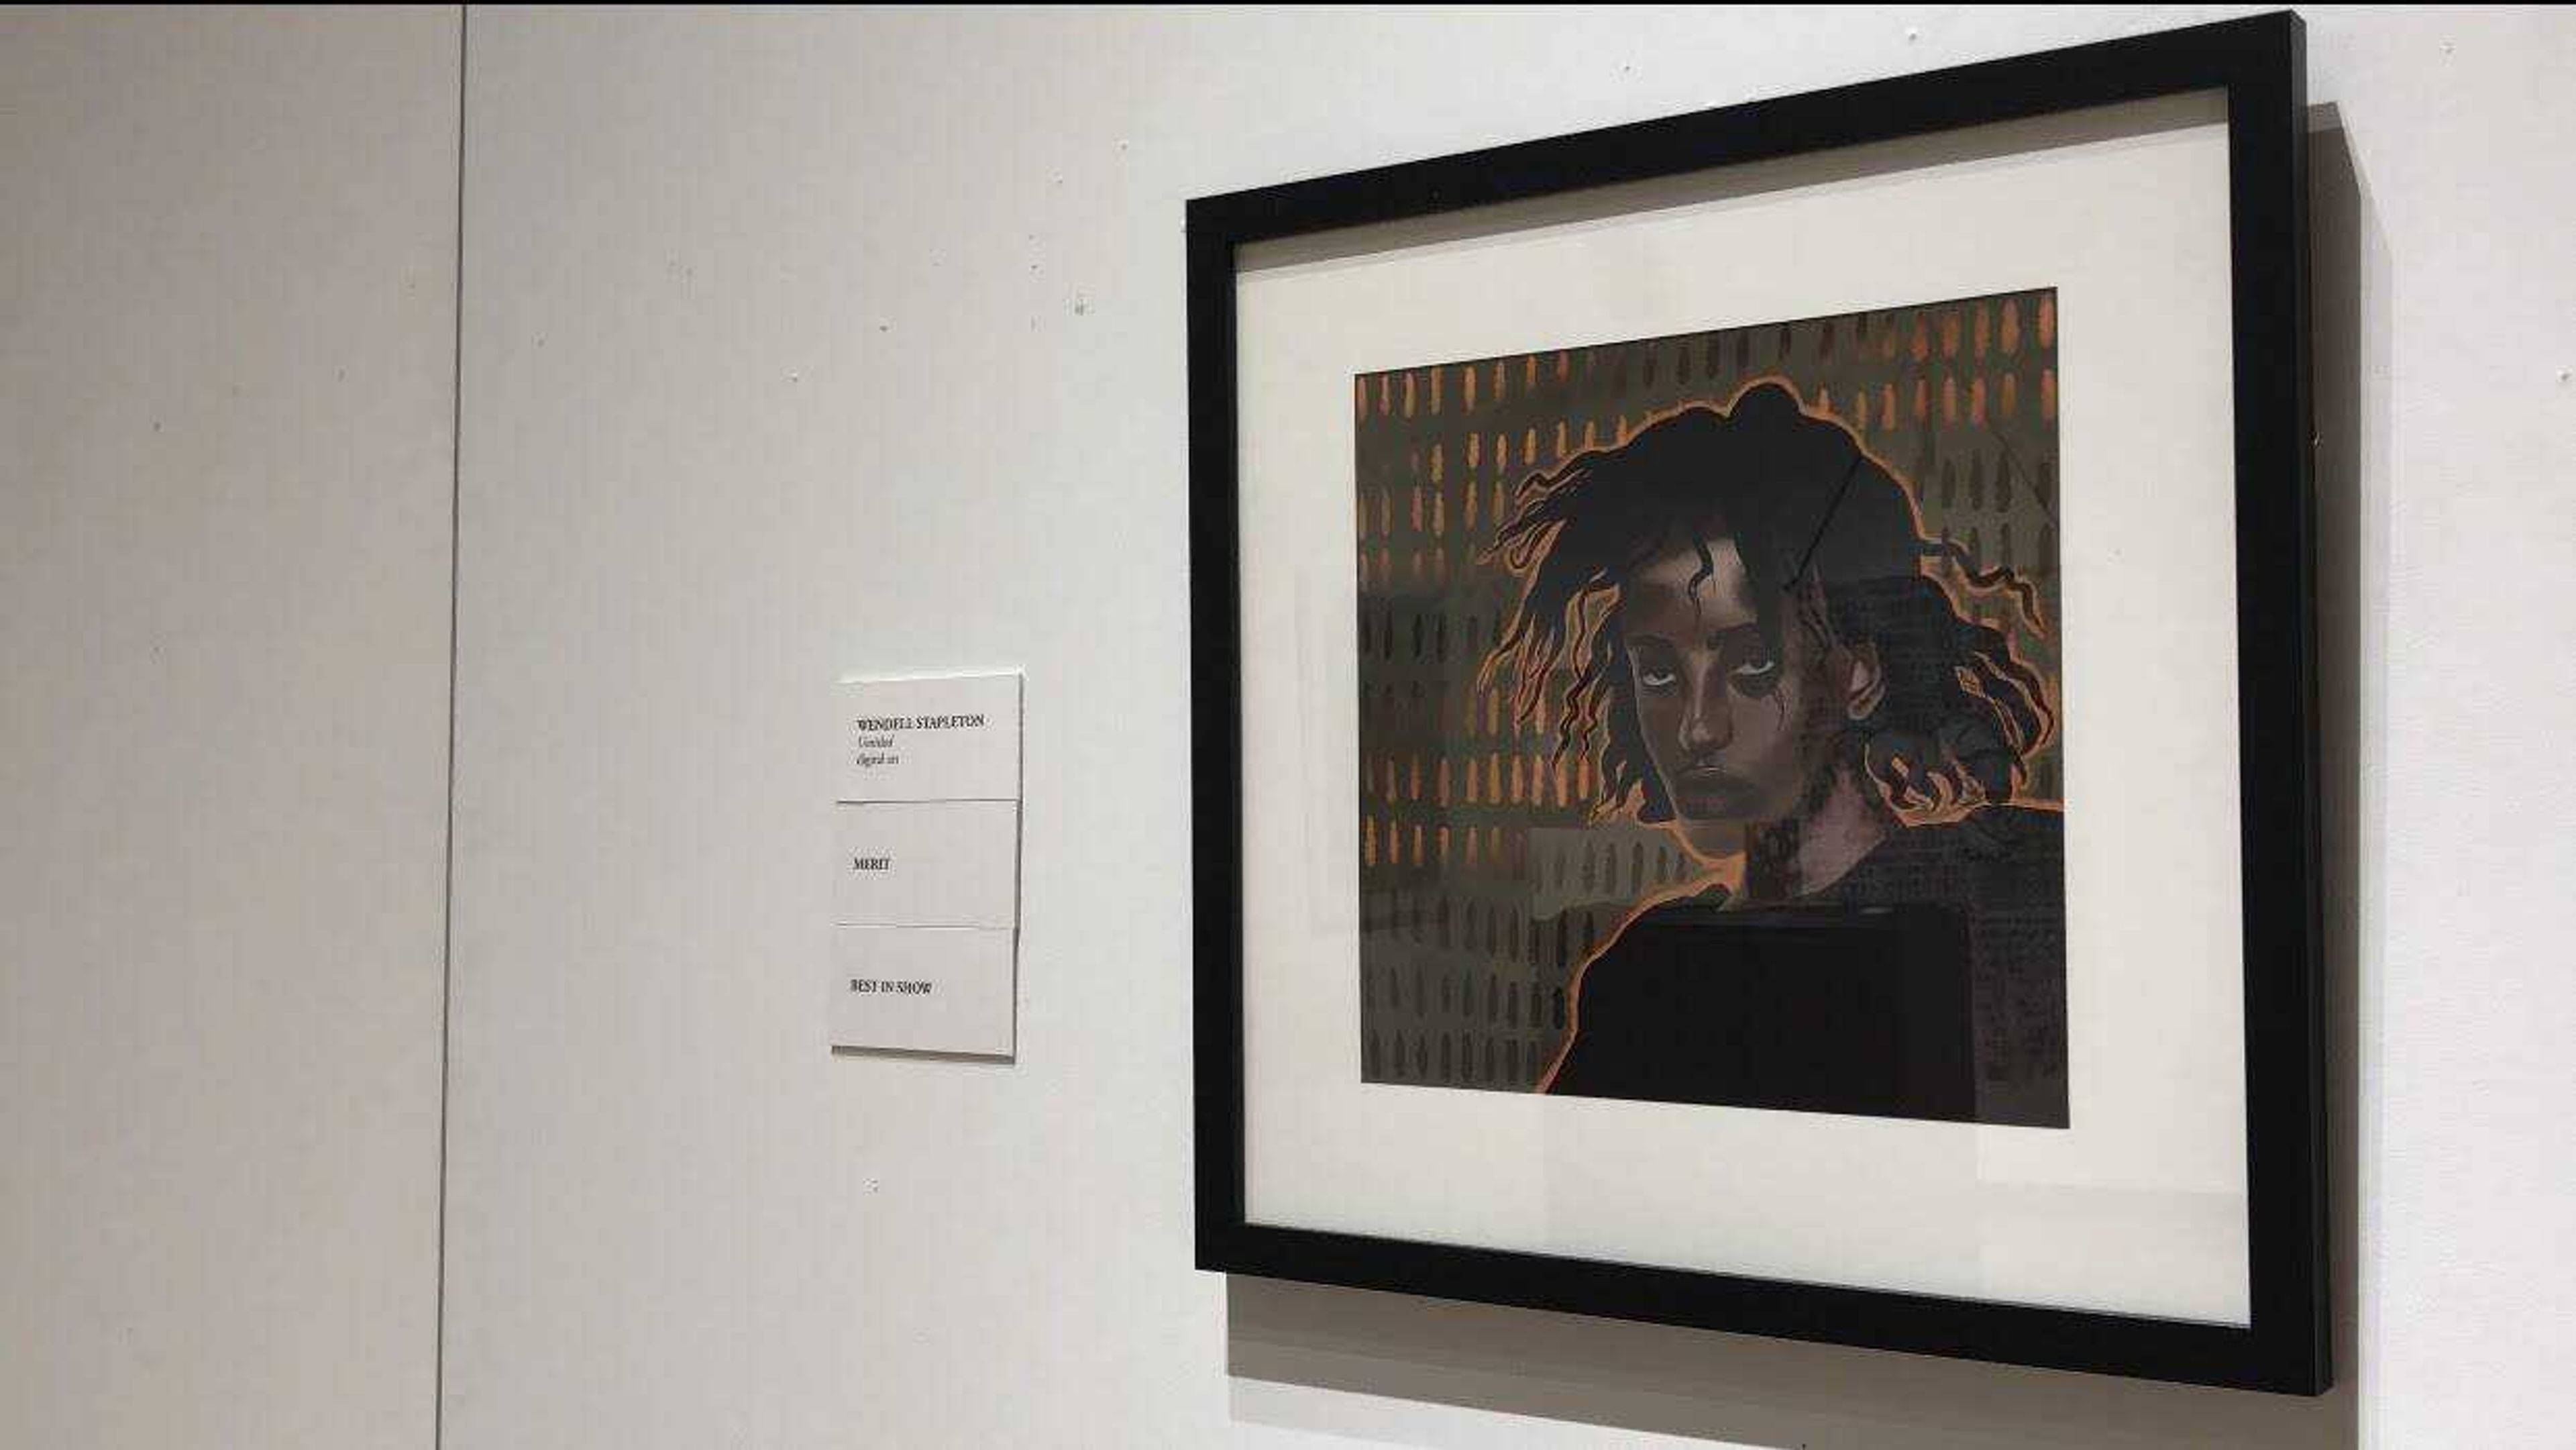 Wendell Stapleton’s digital artwork on display at the museum. Stapleton’s piece titled “Untitled” won merit for “Best in Show.” 